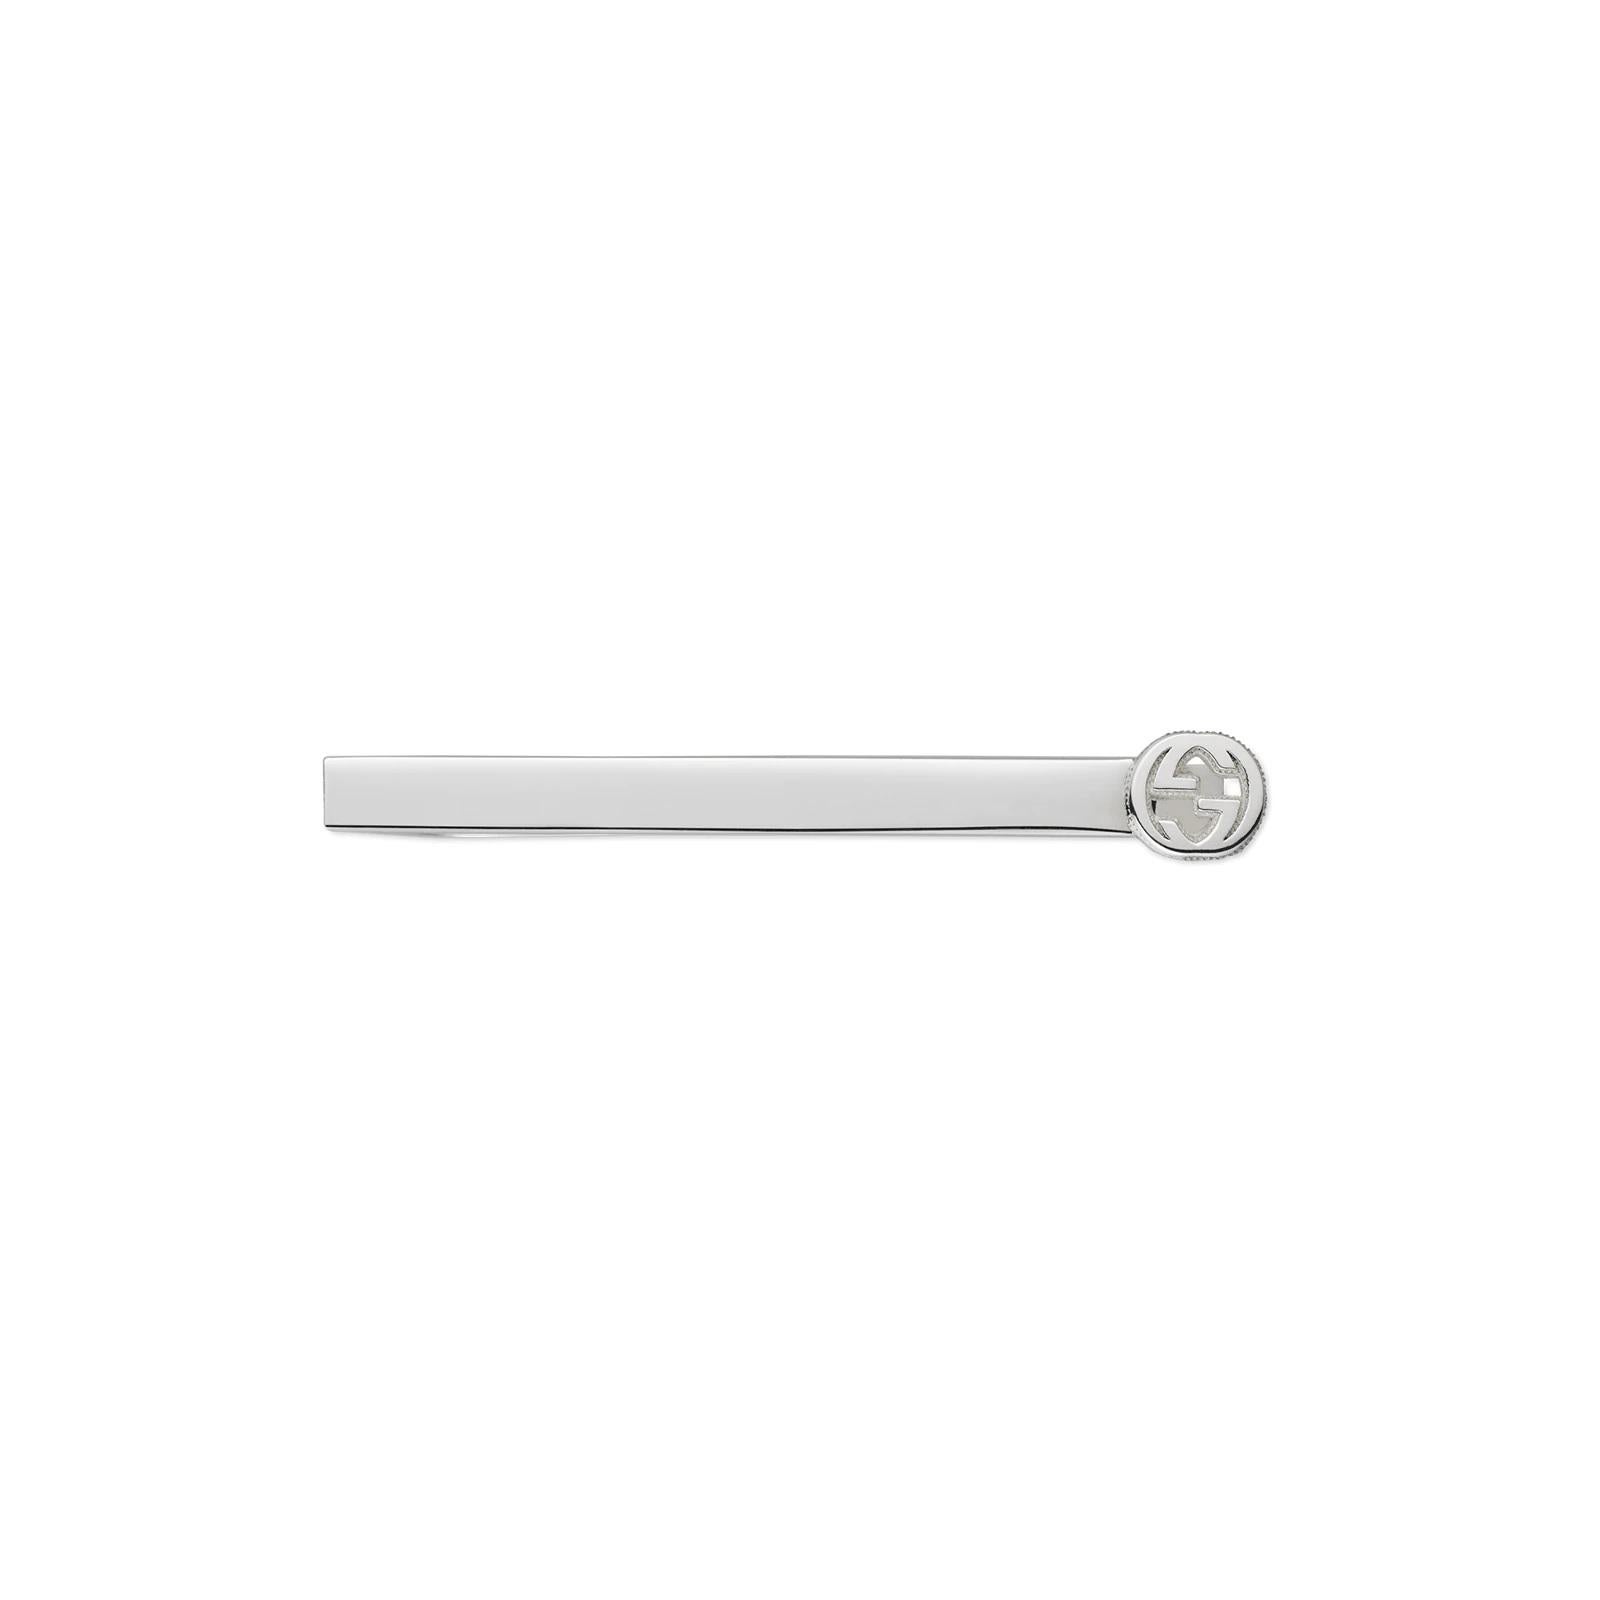 This sterling silver tie slide is the perfect companion to your favorite tie. Sleek and stylish with a textured signature GG logo print.

Sterling Silver
Silver Tie Slide
Signature GG logo